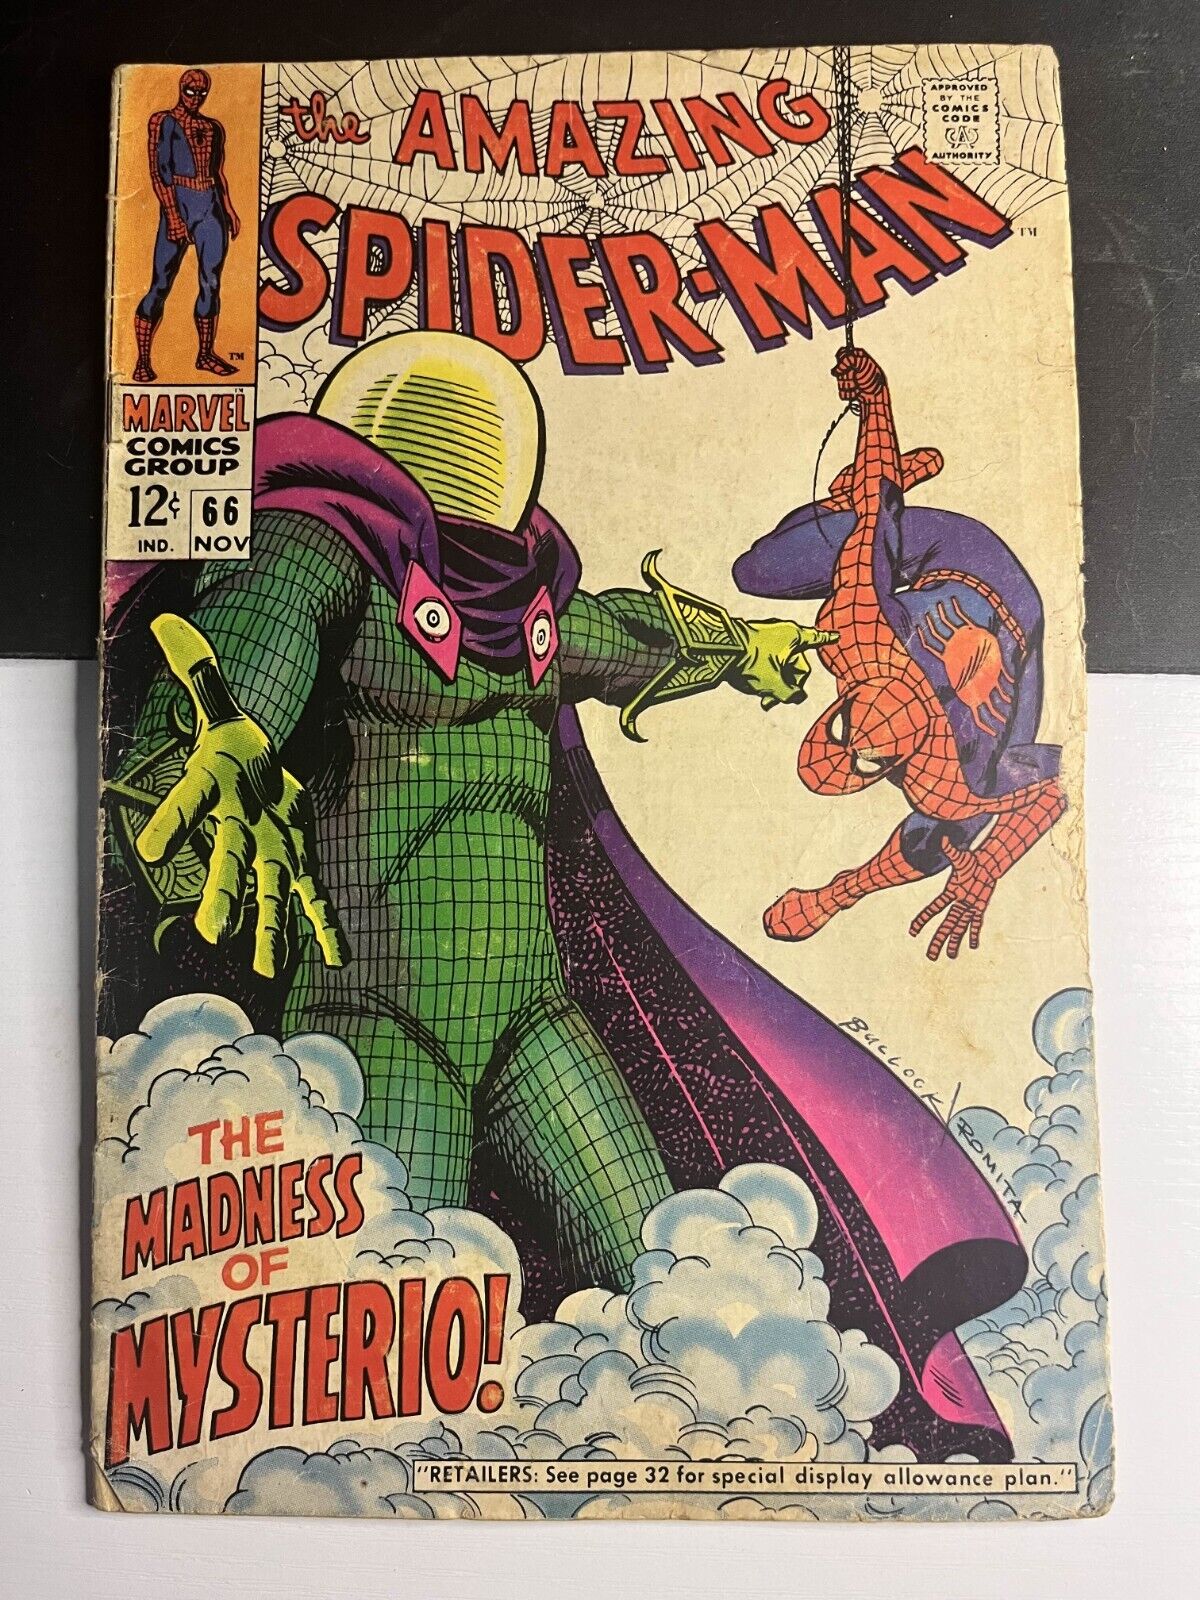 The Amazing Spider-Man #66 (1968) - The Madness of Mysterio